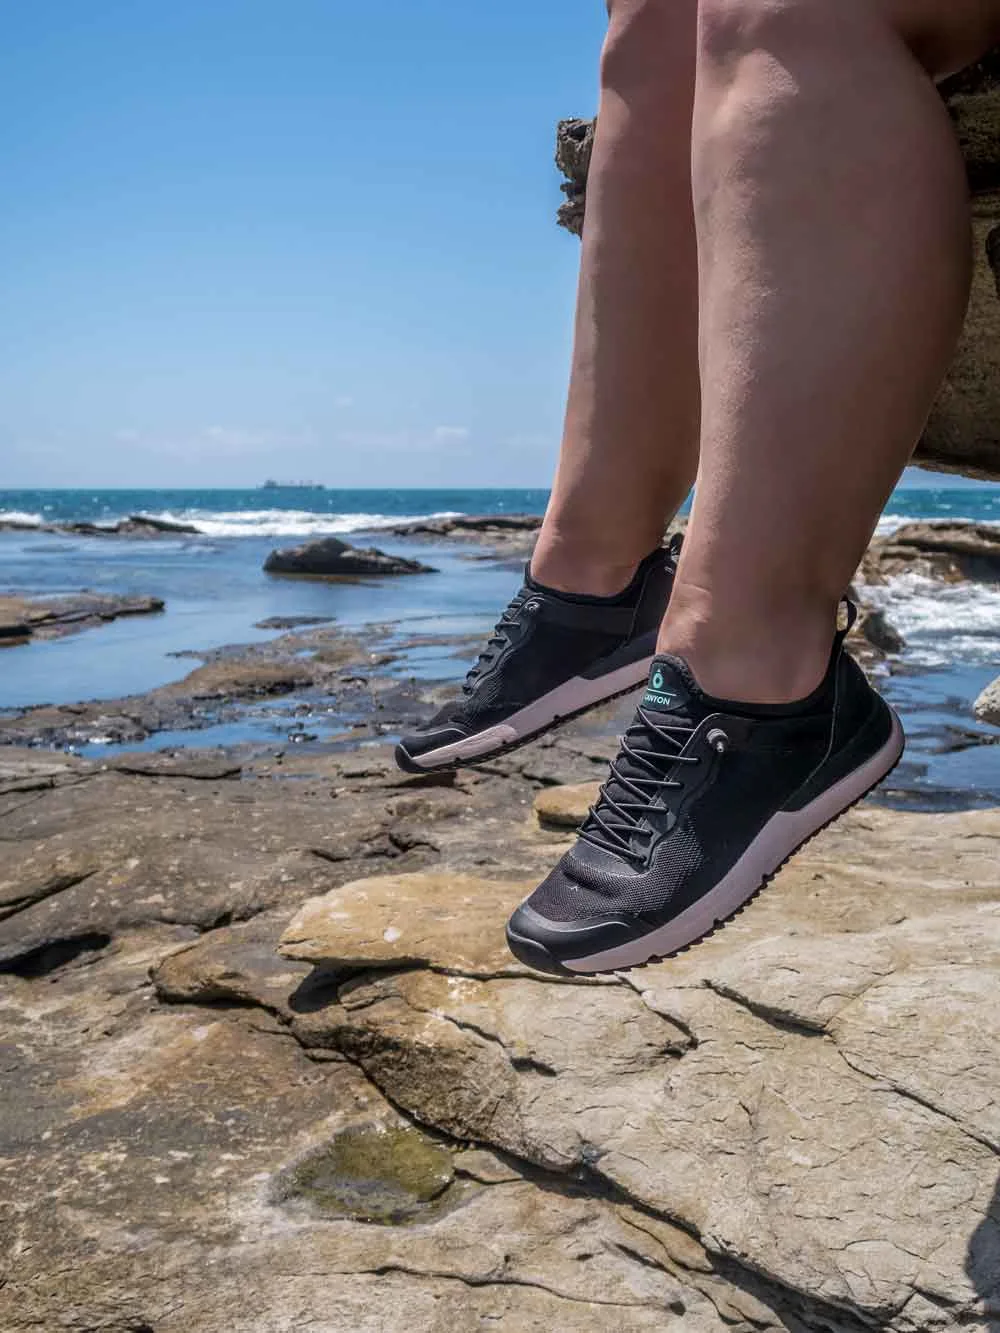 Wearing the Tropicfeel Canyon to explore the rock pools at Shelly Beach